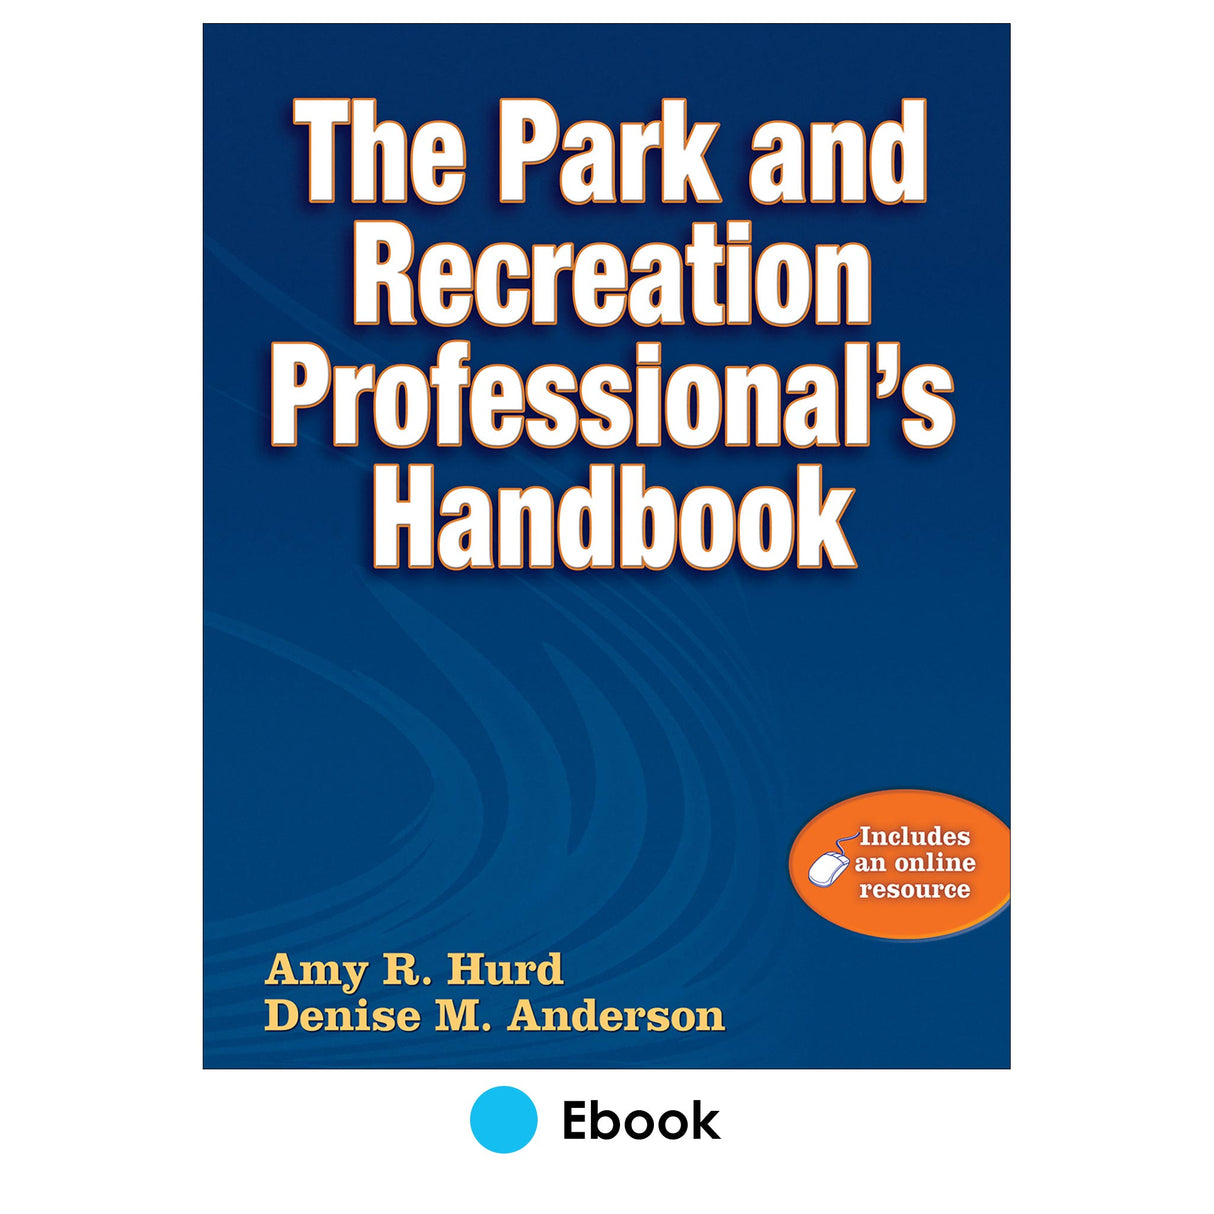 Park and Recreation Professional's Handbook PDF With Online Resource